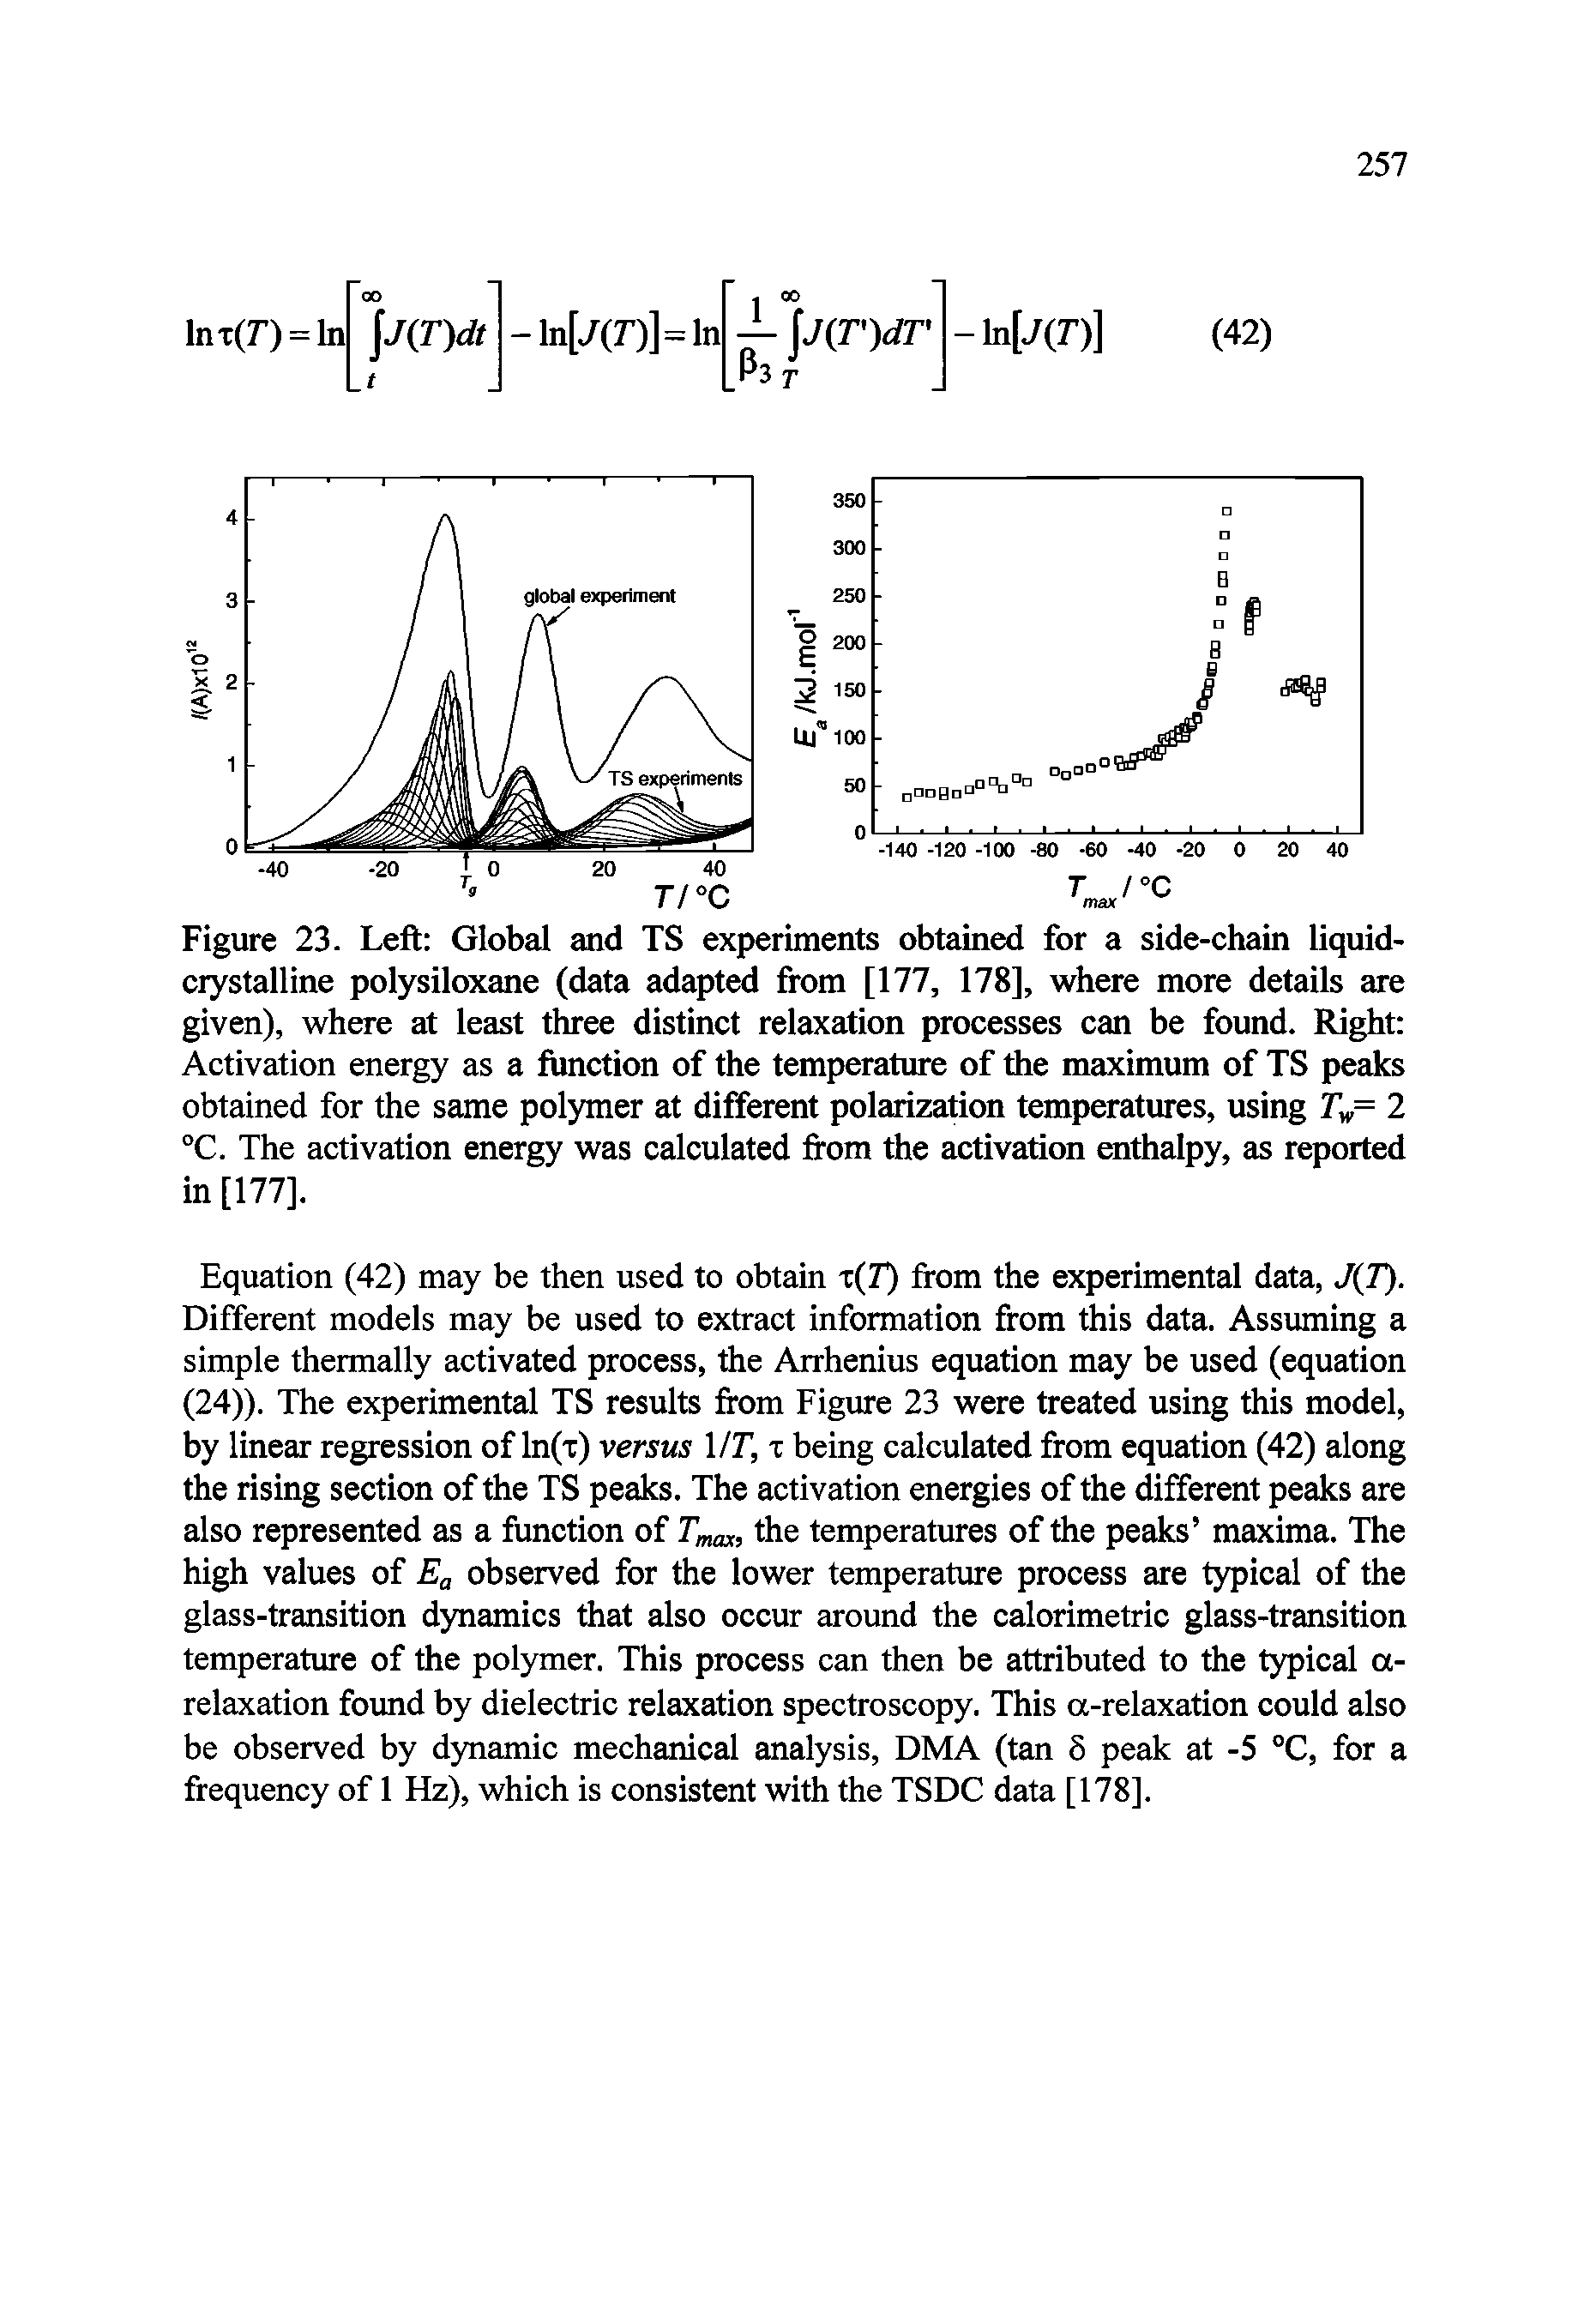 Figure 23. Left Global and TS experiments obtained for a side-chain liquid-crystalline polysiloxane (data adapted from [177, 178], where more details are given), where at least three distinct relaxation processes can be found. Right Activation energy as a function of the temperature of the maximum of TS peaks obtained for the same polymer at different polarization temperatures, using r = 2 °C. The activation energy was calculated from the activation enthalpy, as reported in [177].